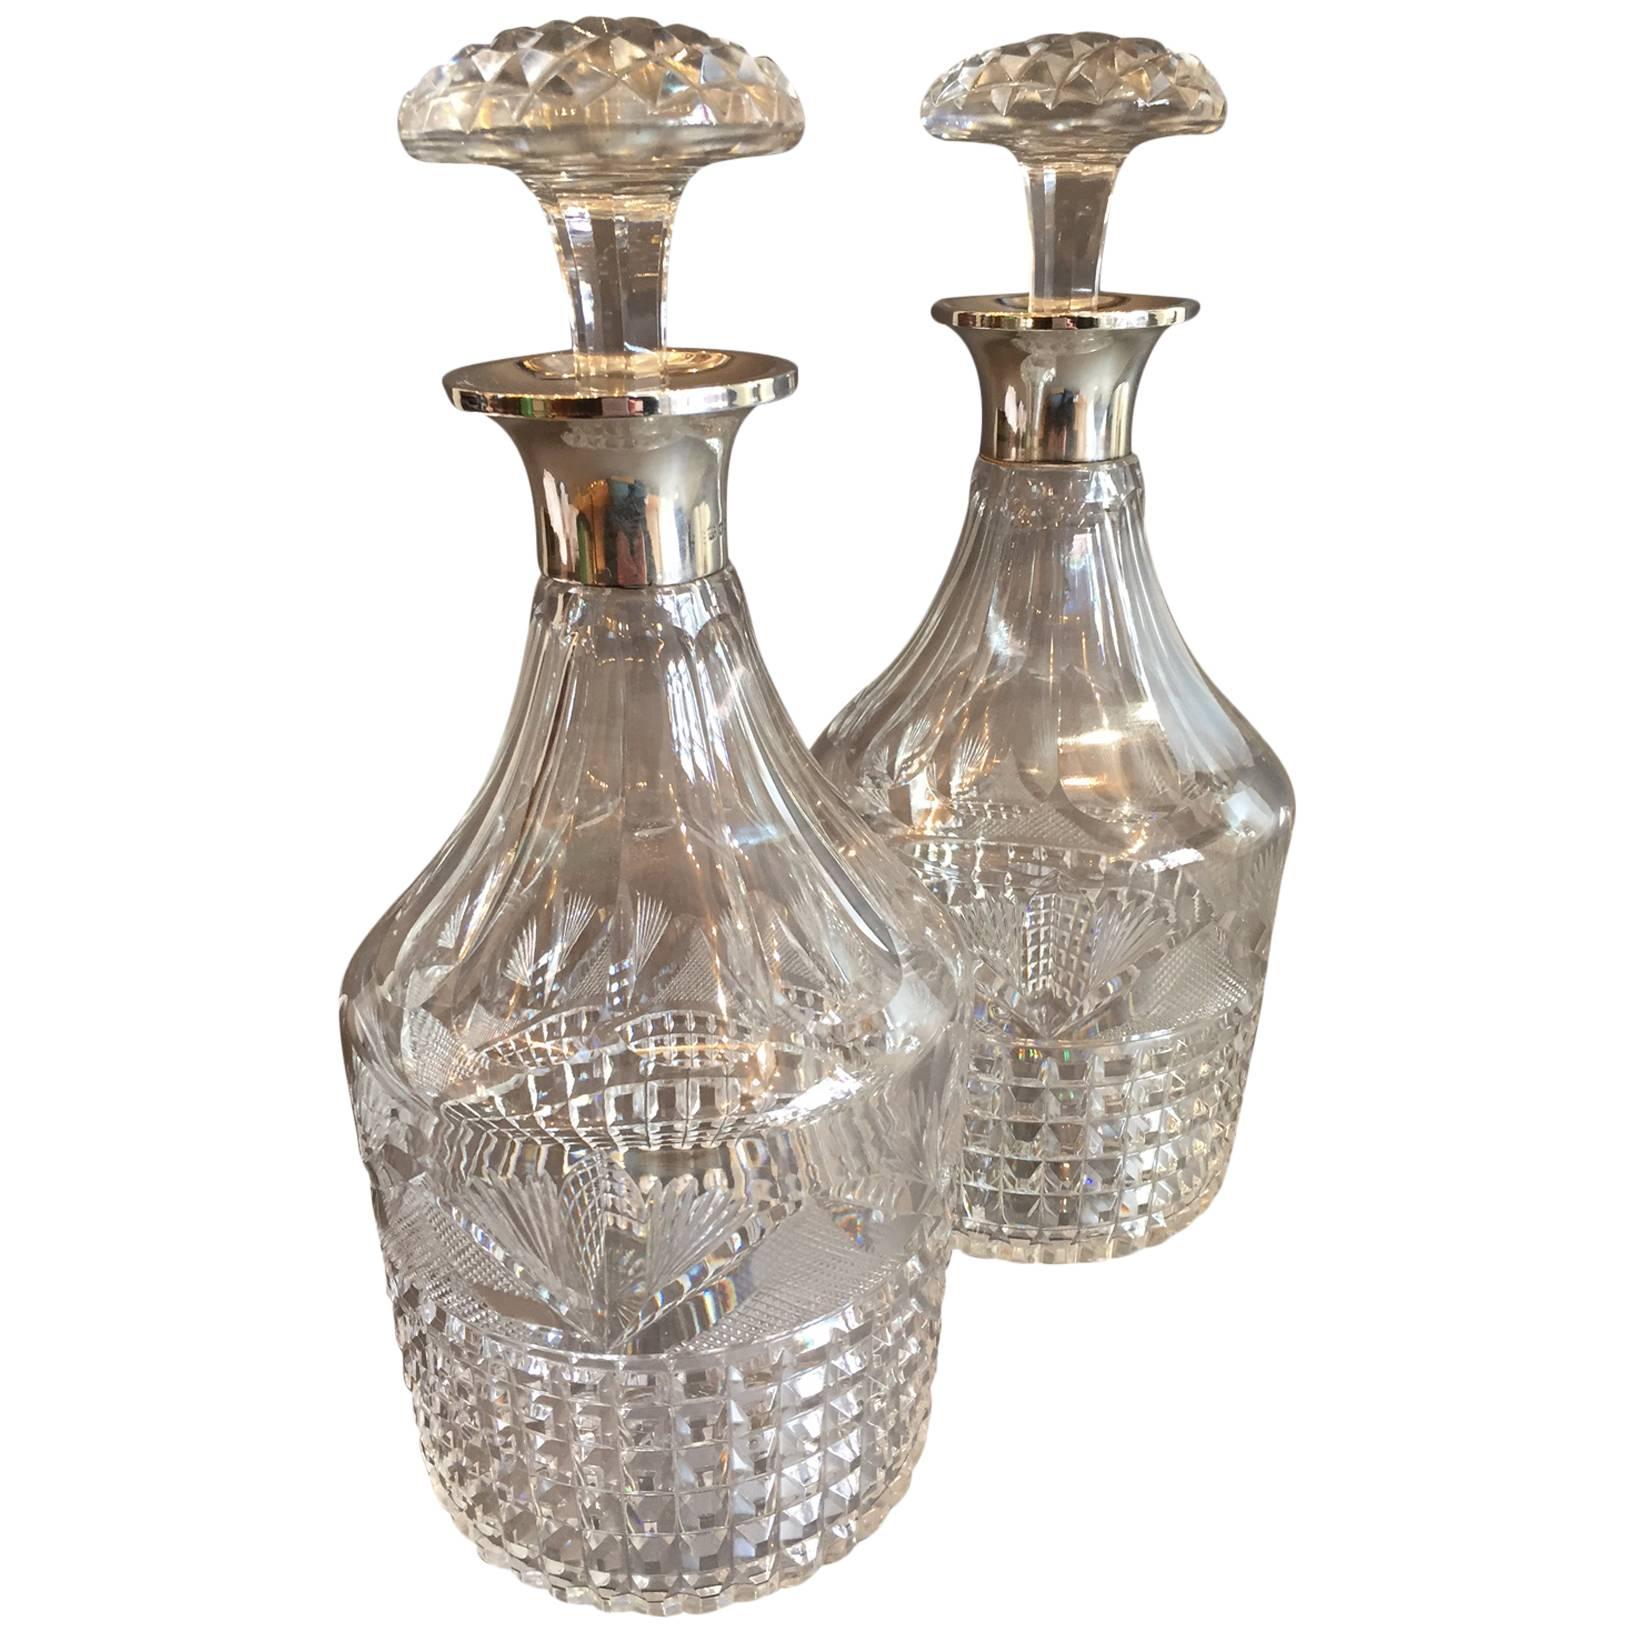 1920s Pair of Round Neck English Silver Decanters